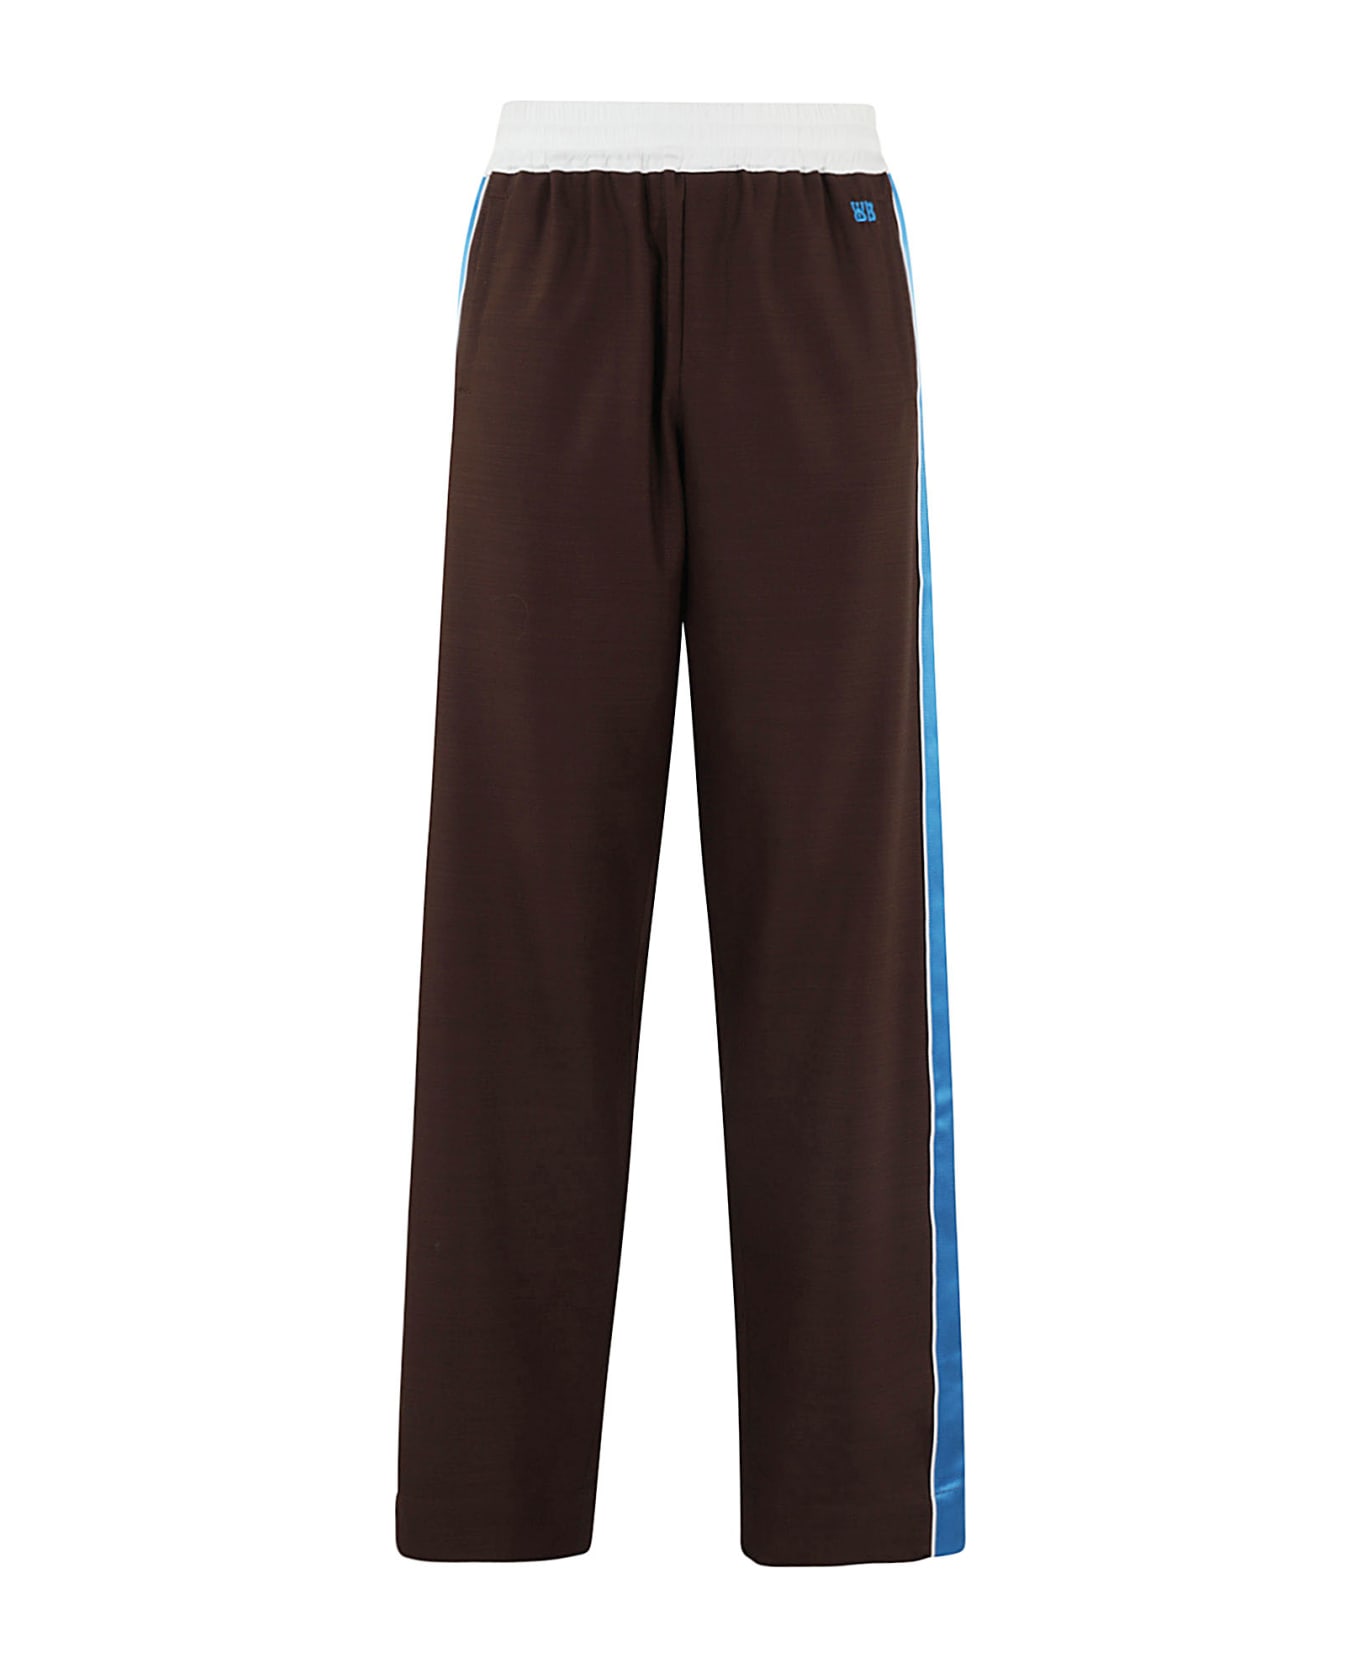 Wales Bonner Courage Trousers - Dark Brown And Blue ボトムス